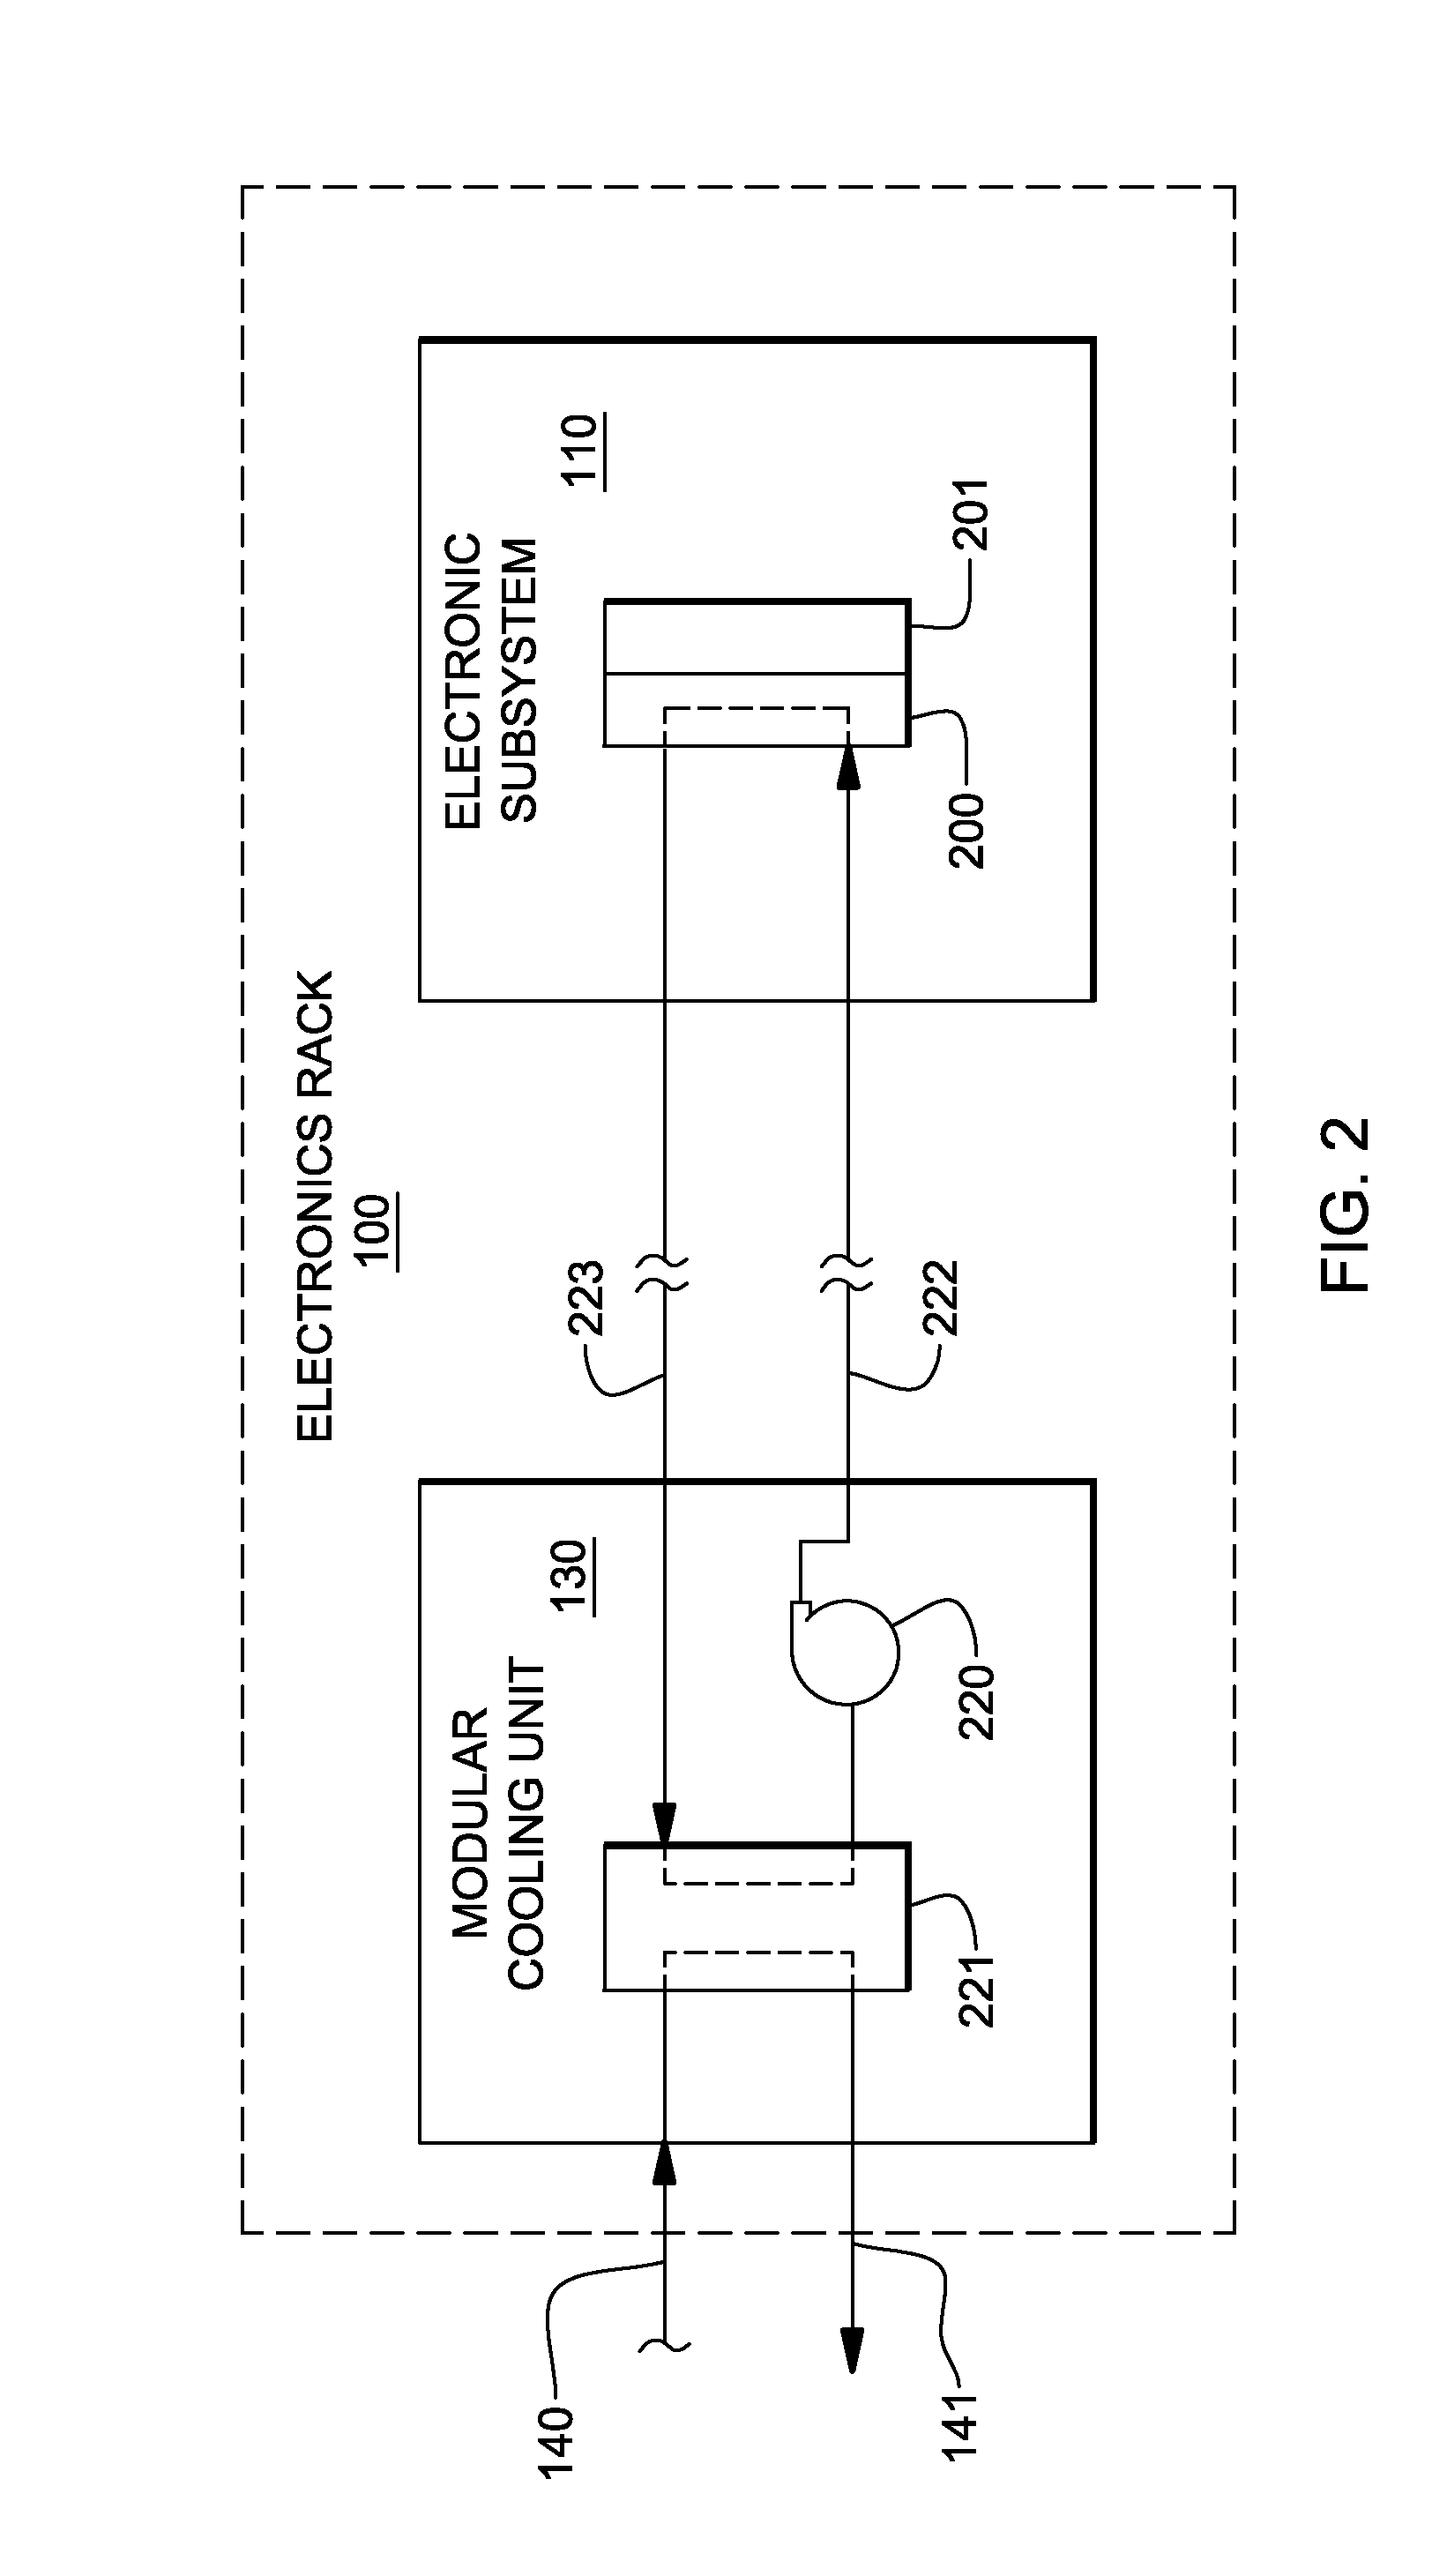 Heat sink structure with a vapor-permeable membrane for two-phase cooling